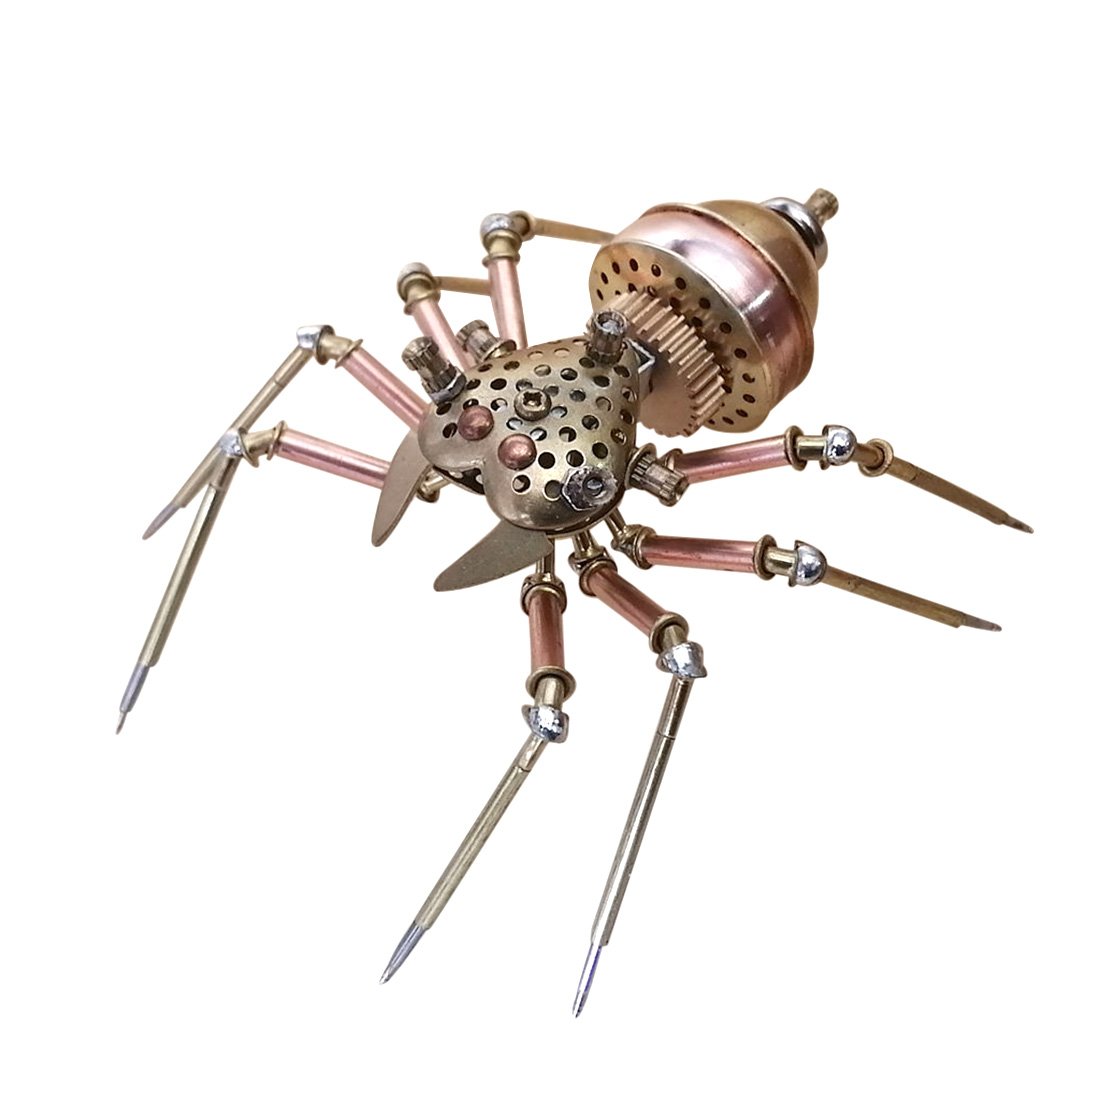 Mechanical Heart Shaped Spider 3D Metal Insects Model Crafts Valentine's Gift